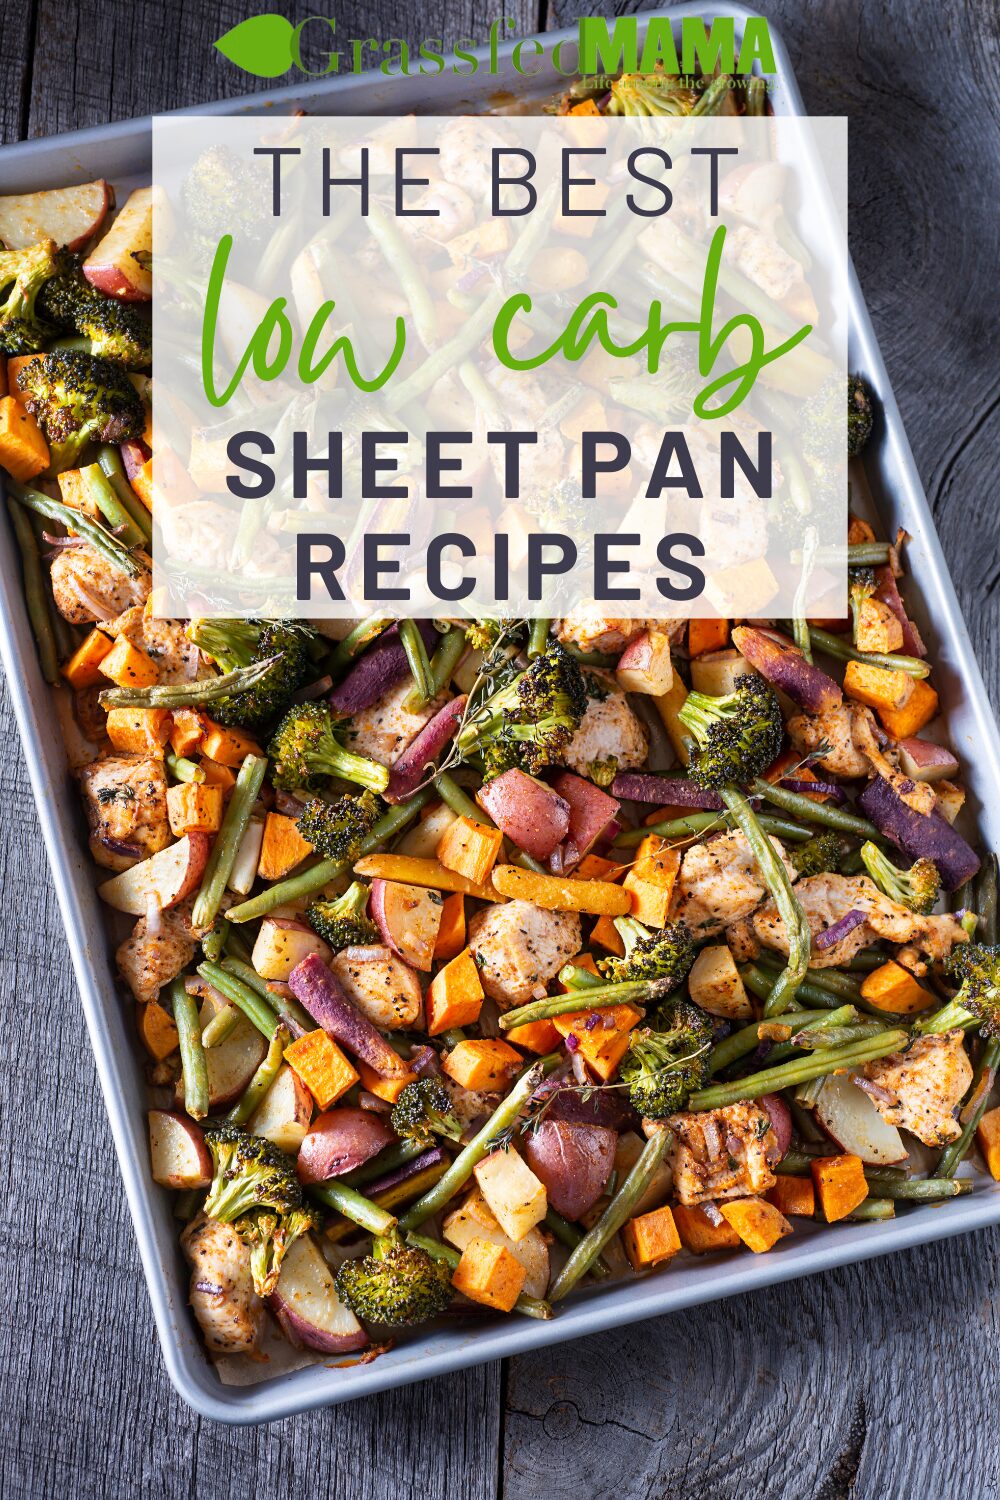 The Best Low Carb Sheet Pan Recipes